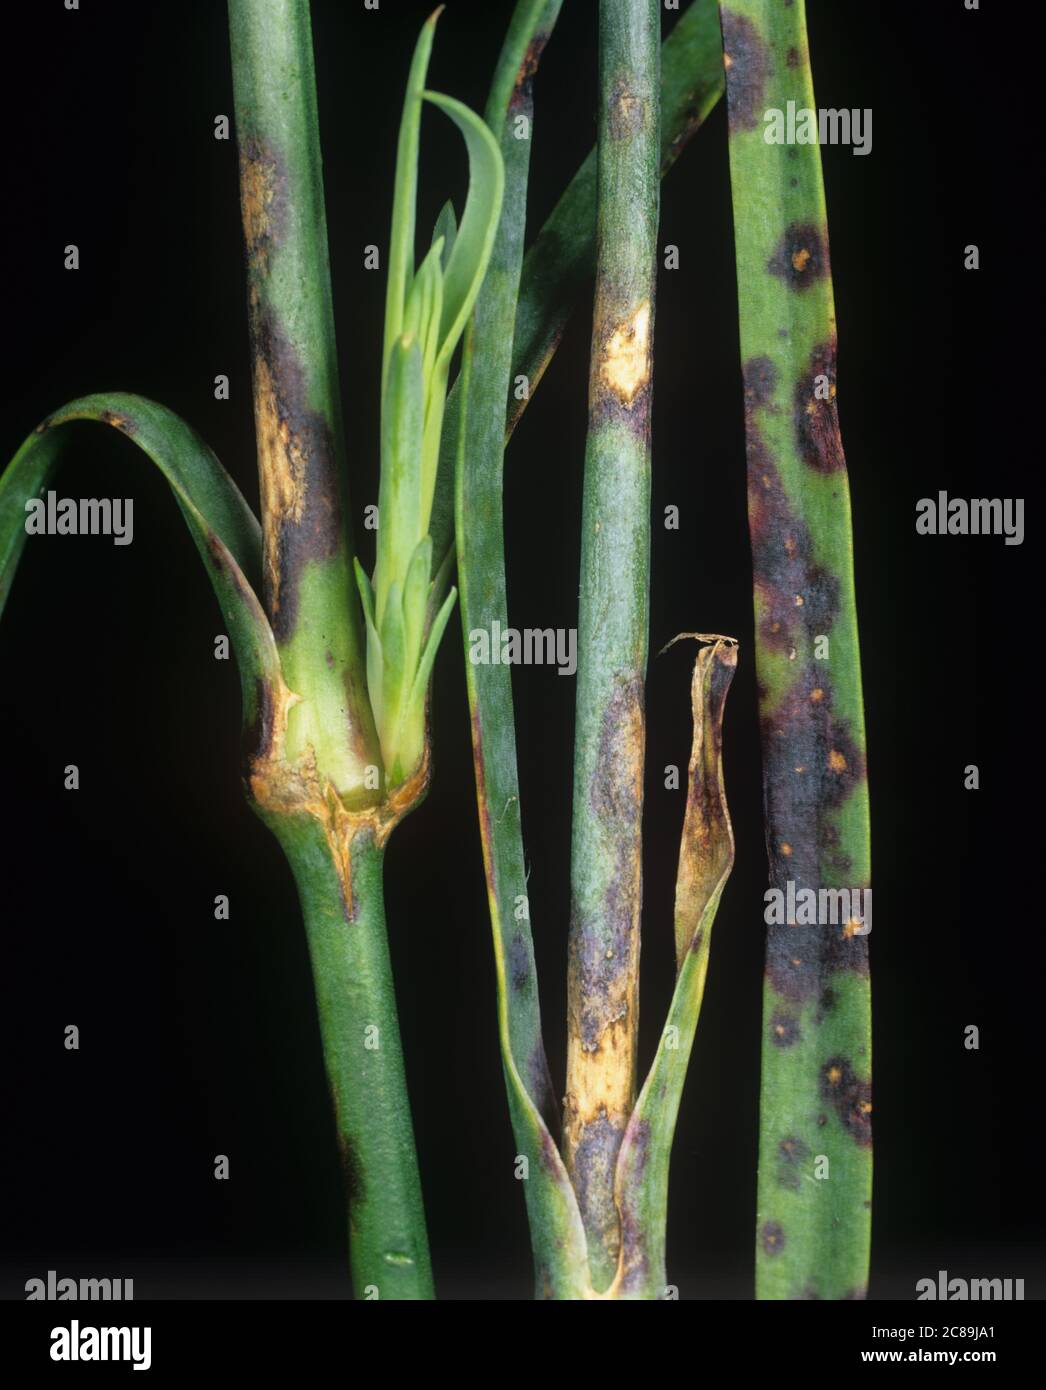 Dianthus leaf spot (Septoria dianthi) fungus  infection on stem and leaves of and ornamental pink (Dianthus spp.) Stock Photo